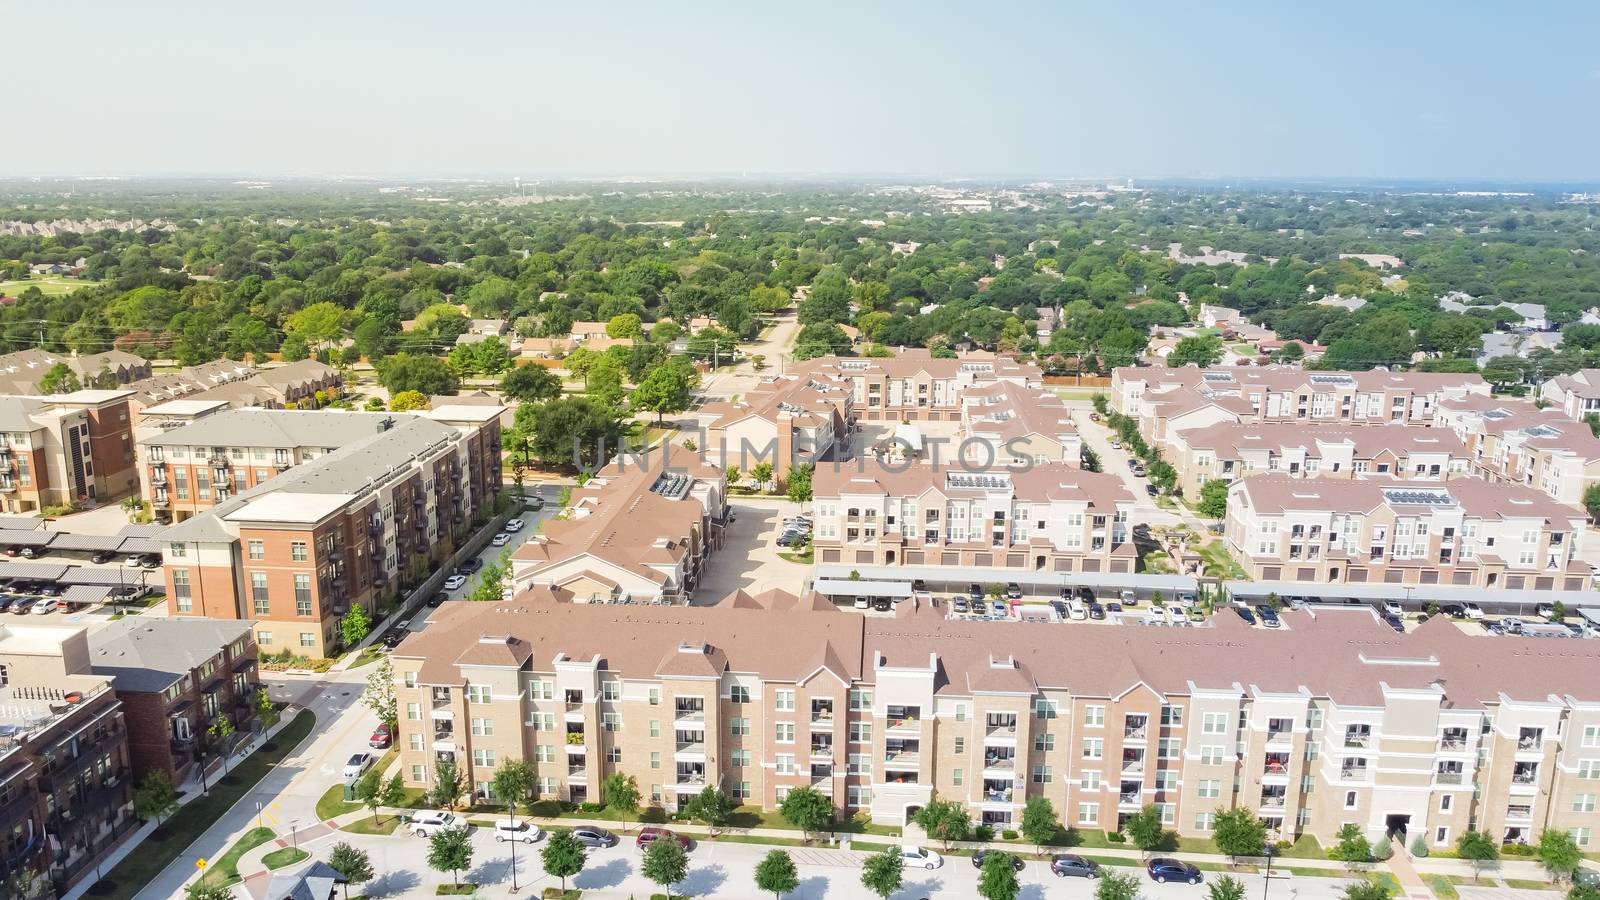 Aerial view multistory apartment complex and suburban residential area in Flower Mound, Texas, US by trongnguyen